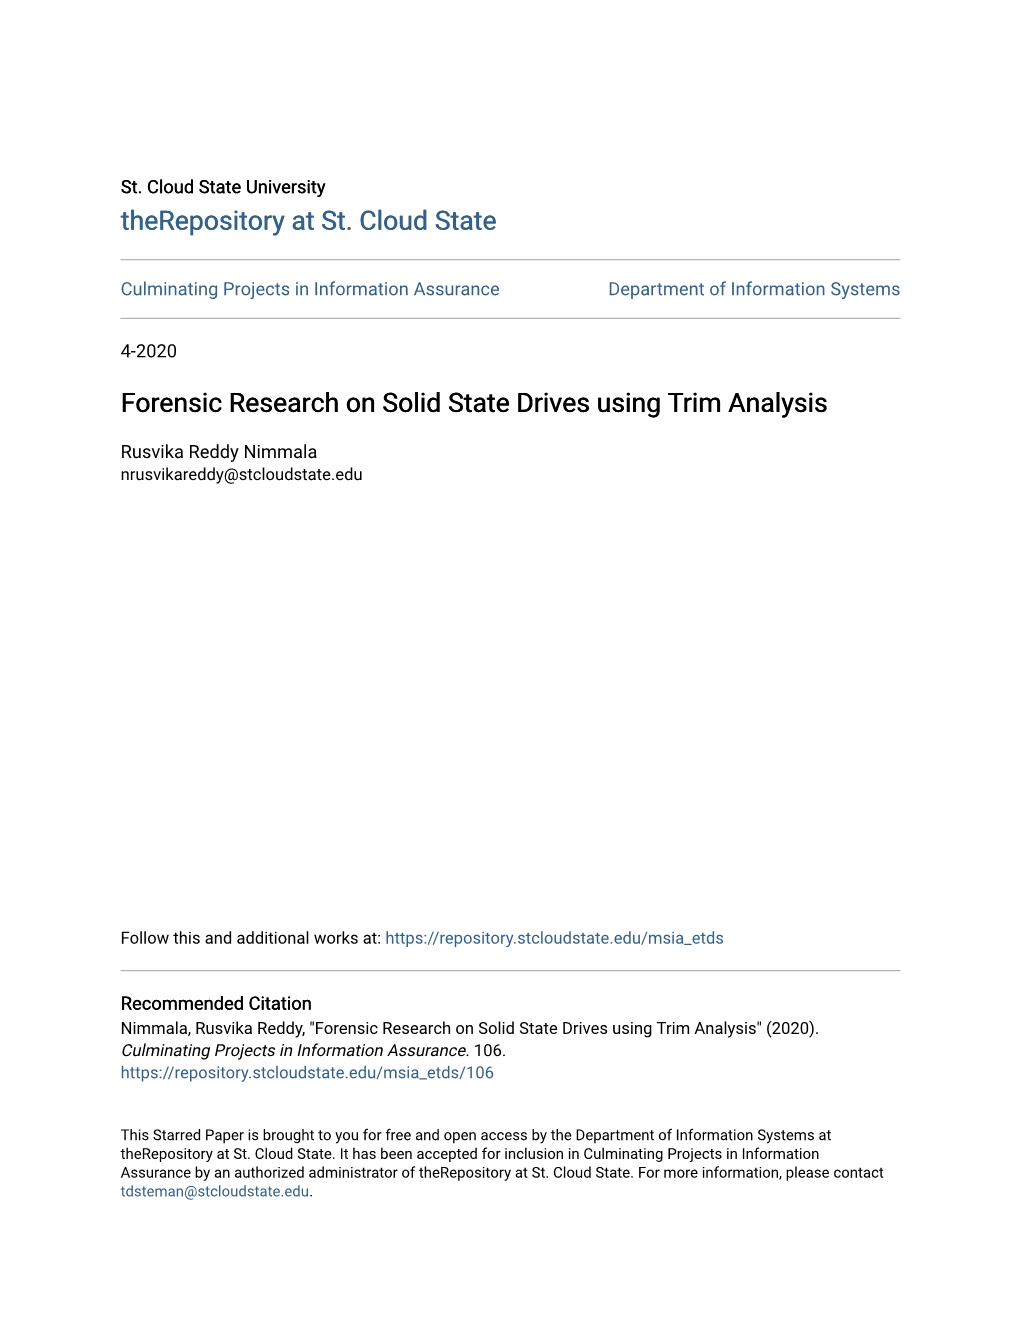 Forensic Research on Solid State Drives Using Trim Analysis